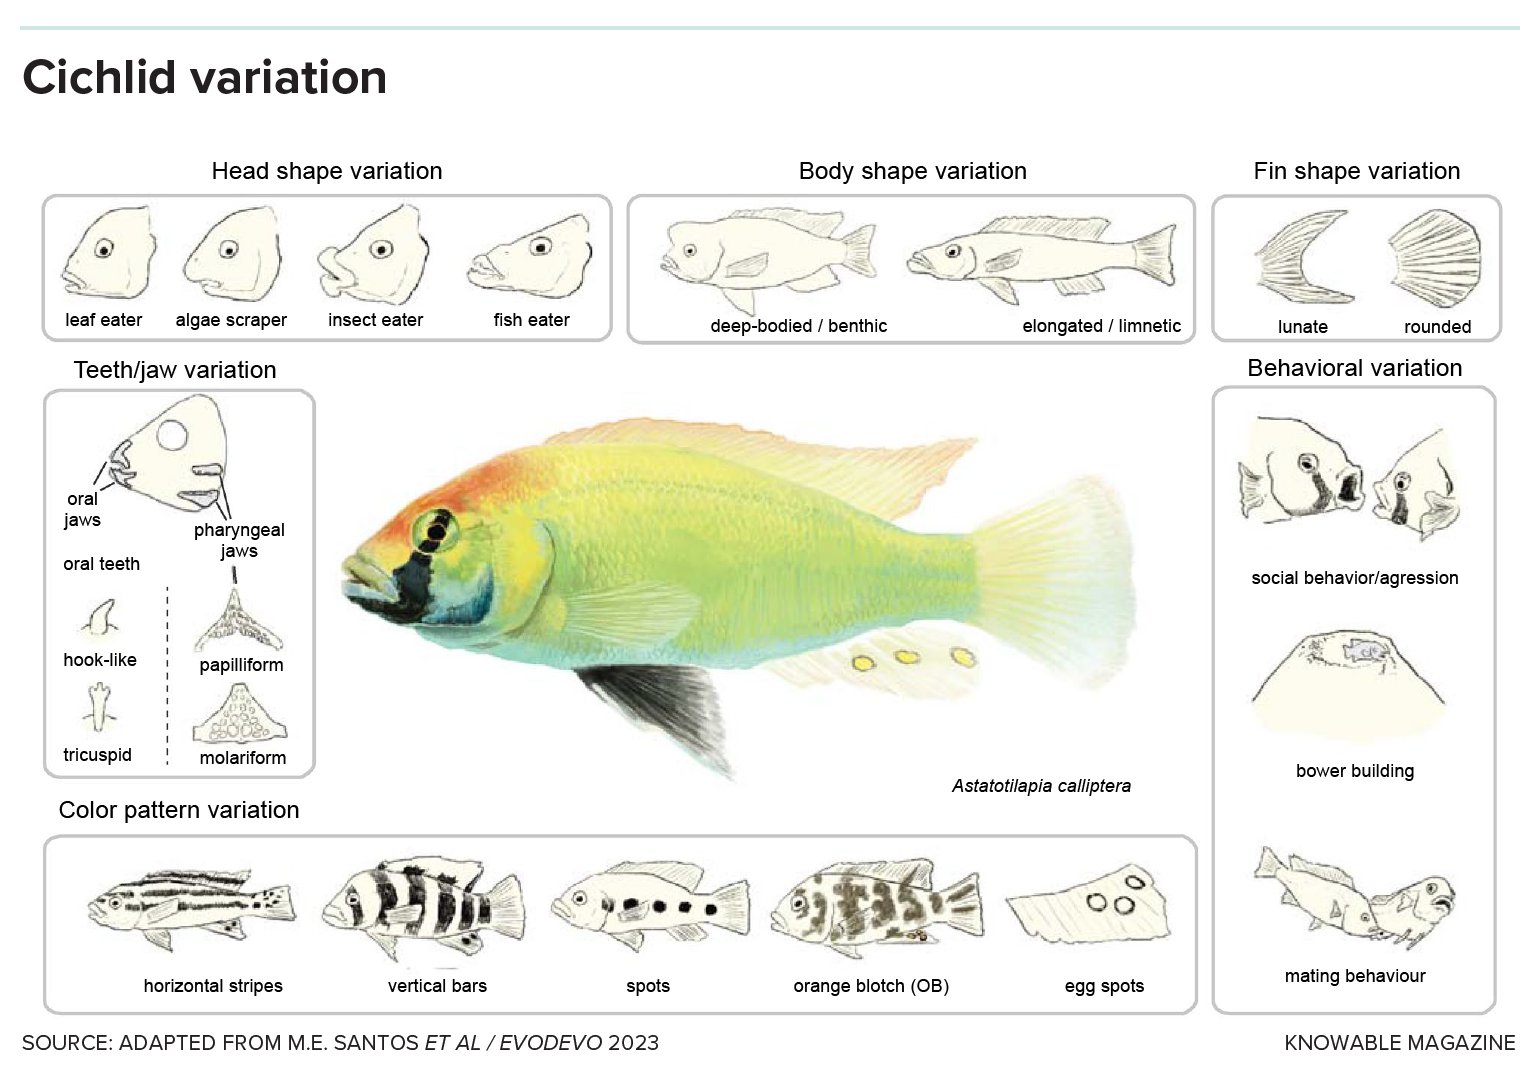 Graphic shows a range of different body shapes and body patterns that different cichlid species have.